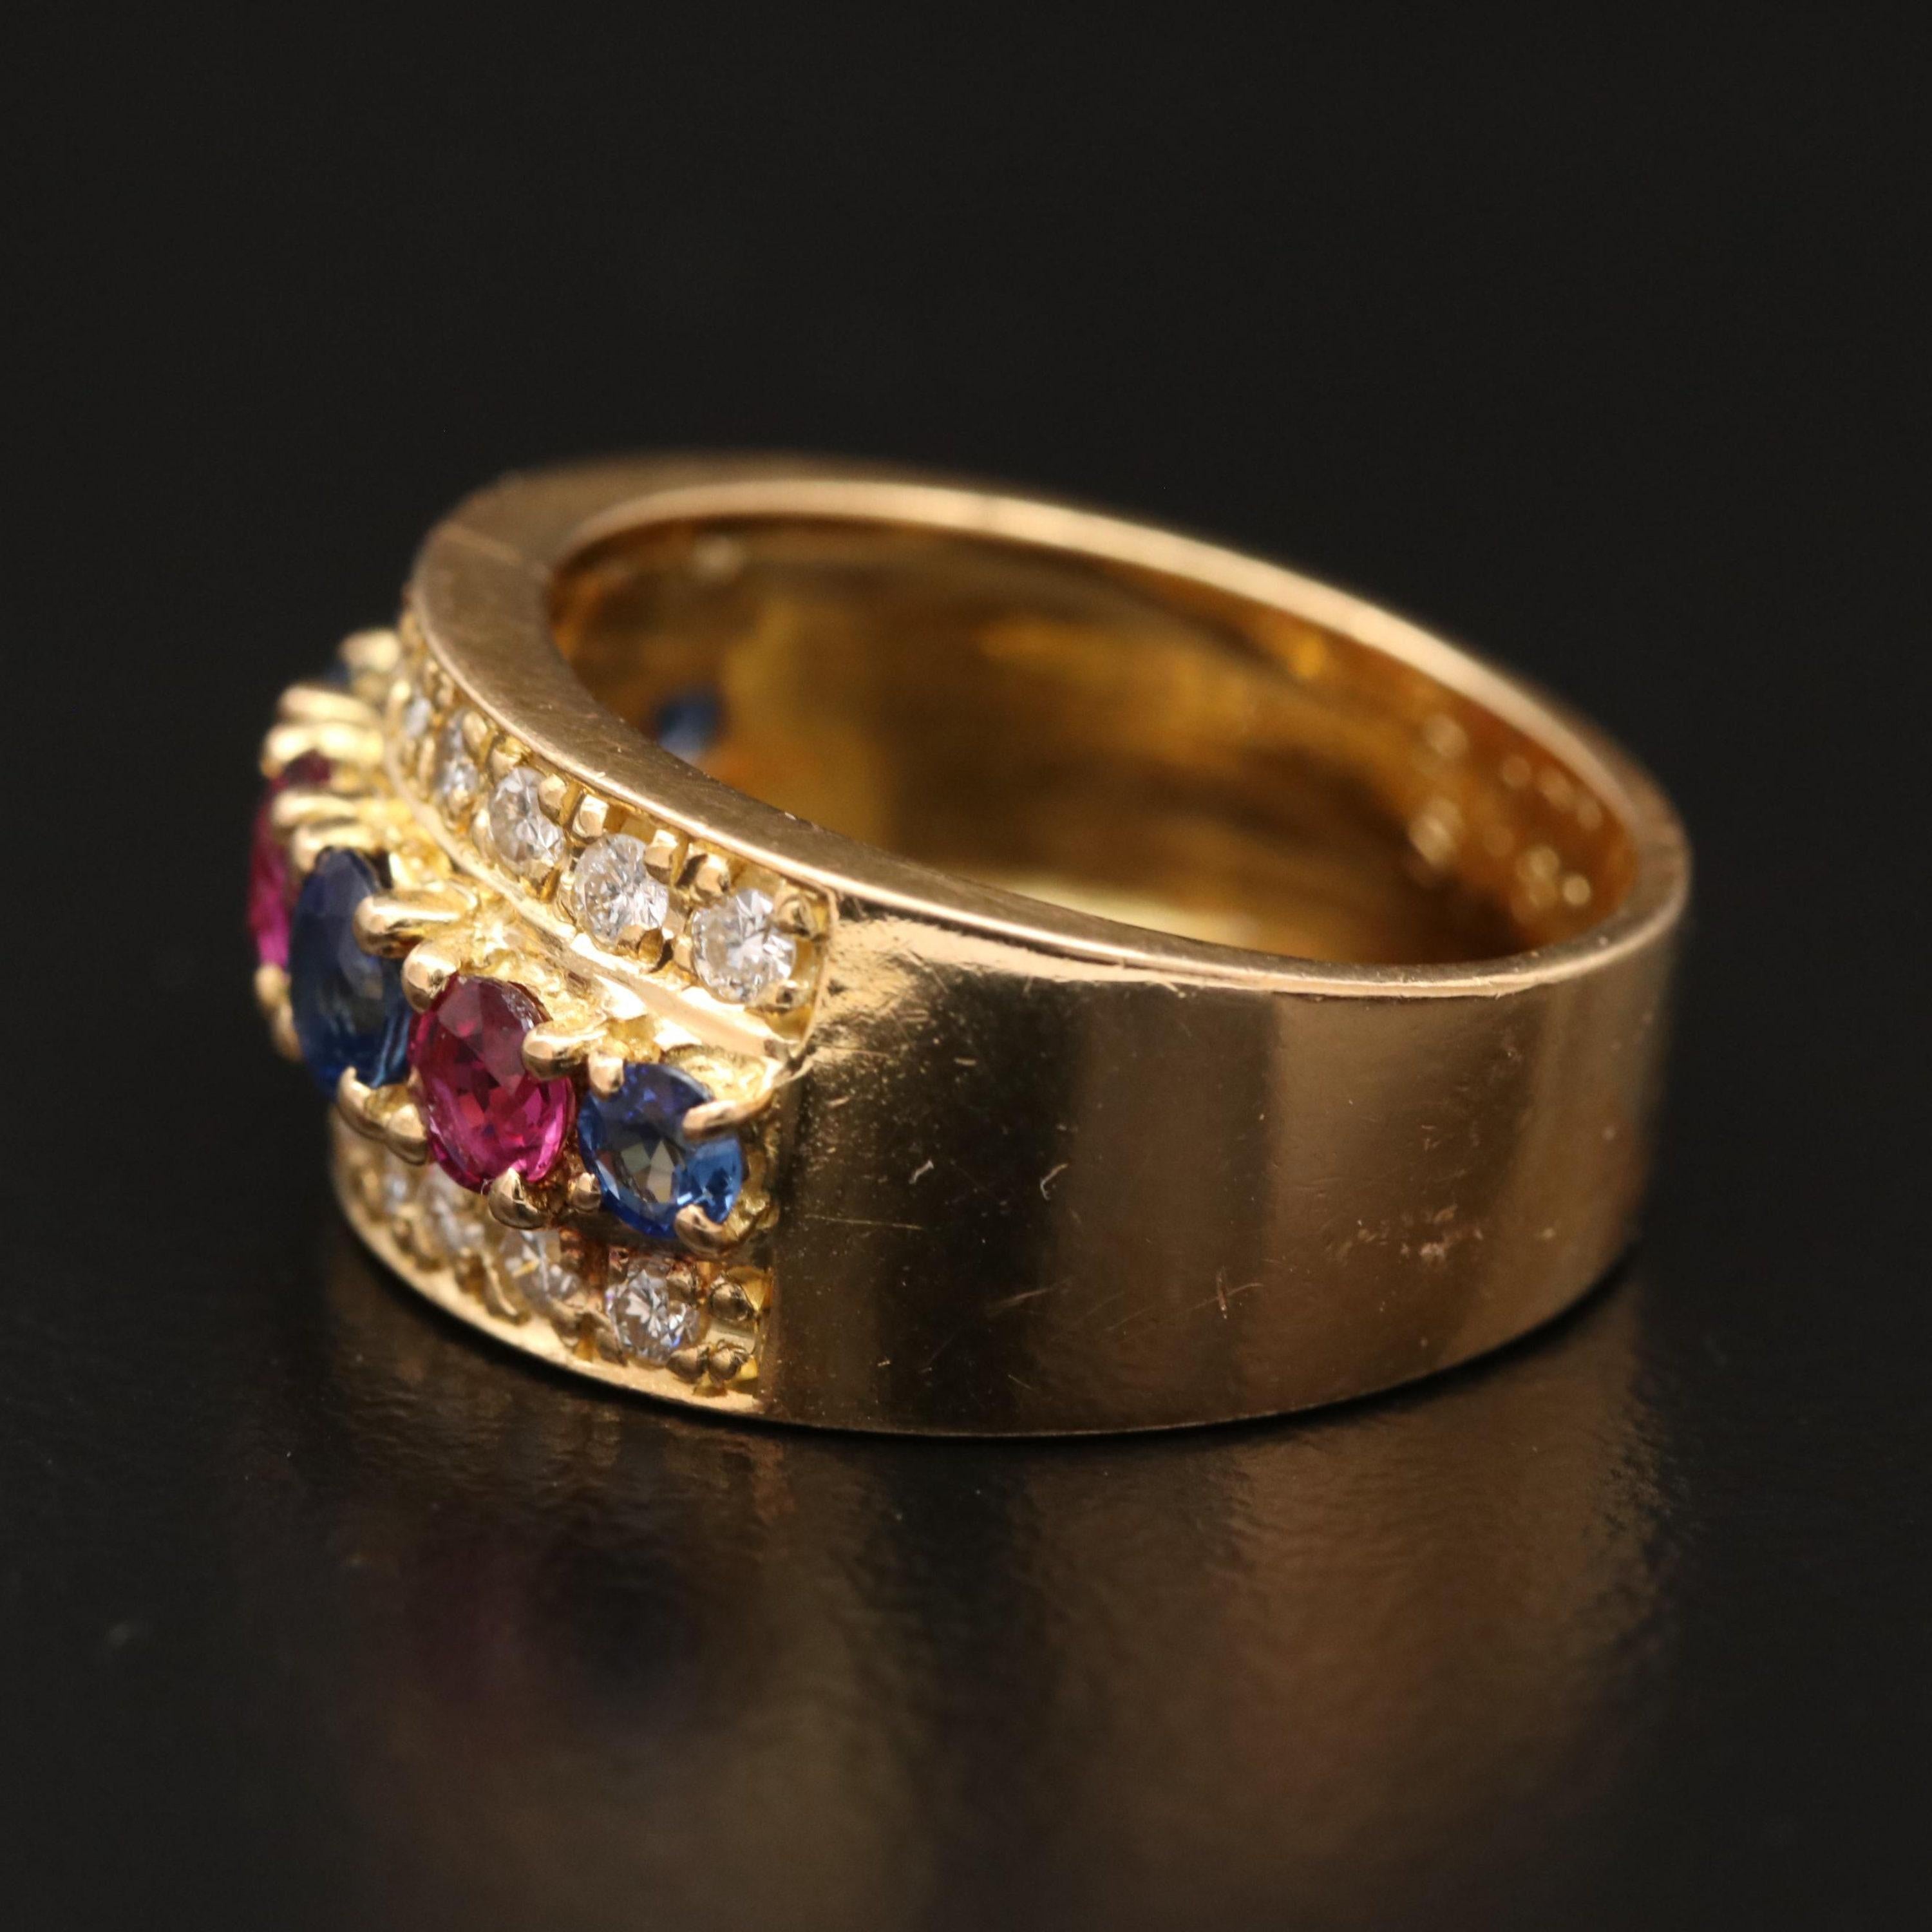 For Sale:  Natural Ruby Sapphire Diamond Engagement Ring Set in 18K Gold, Cocktail Ring 5